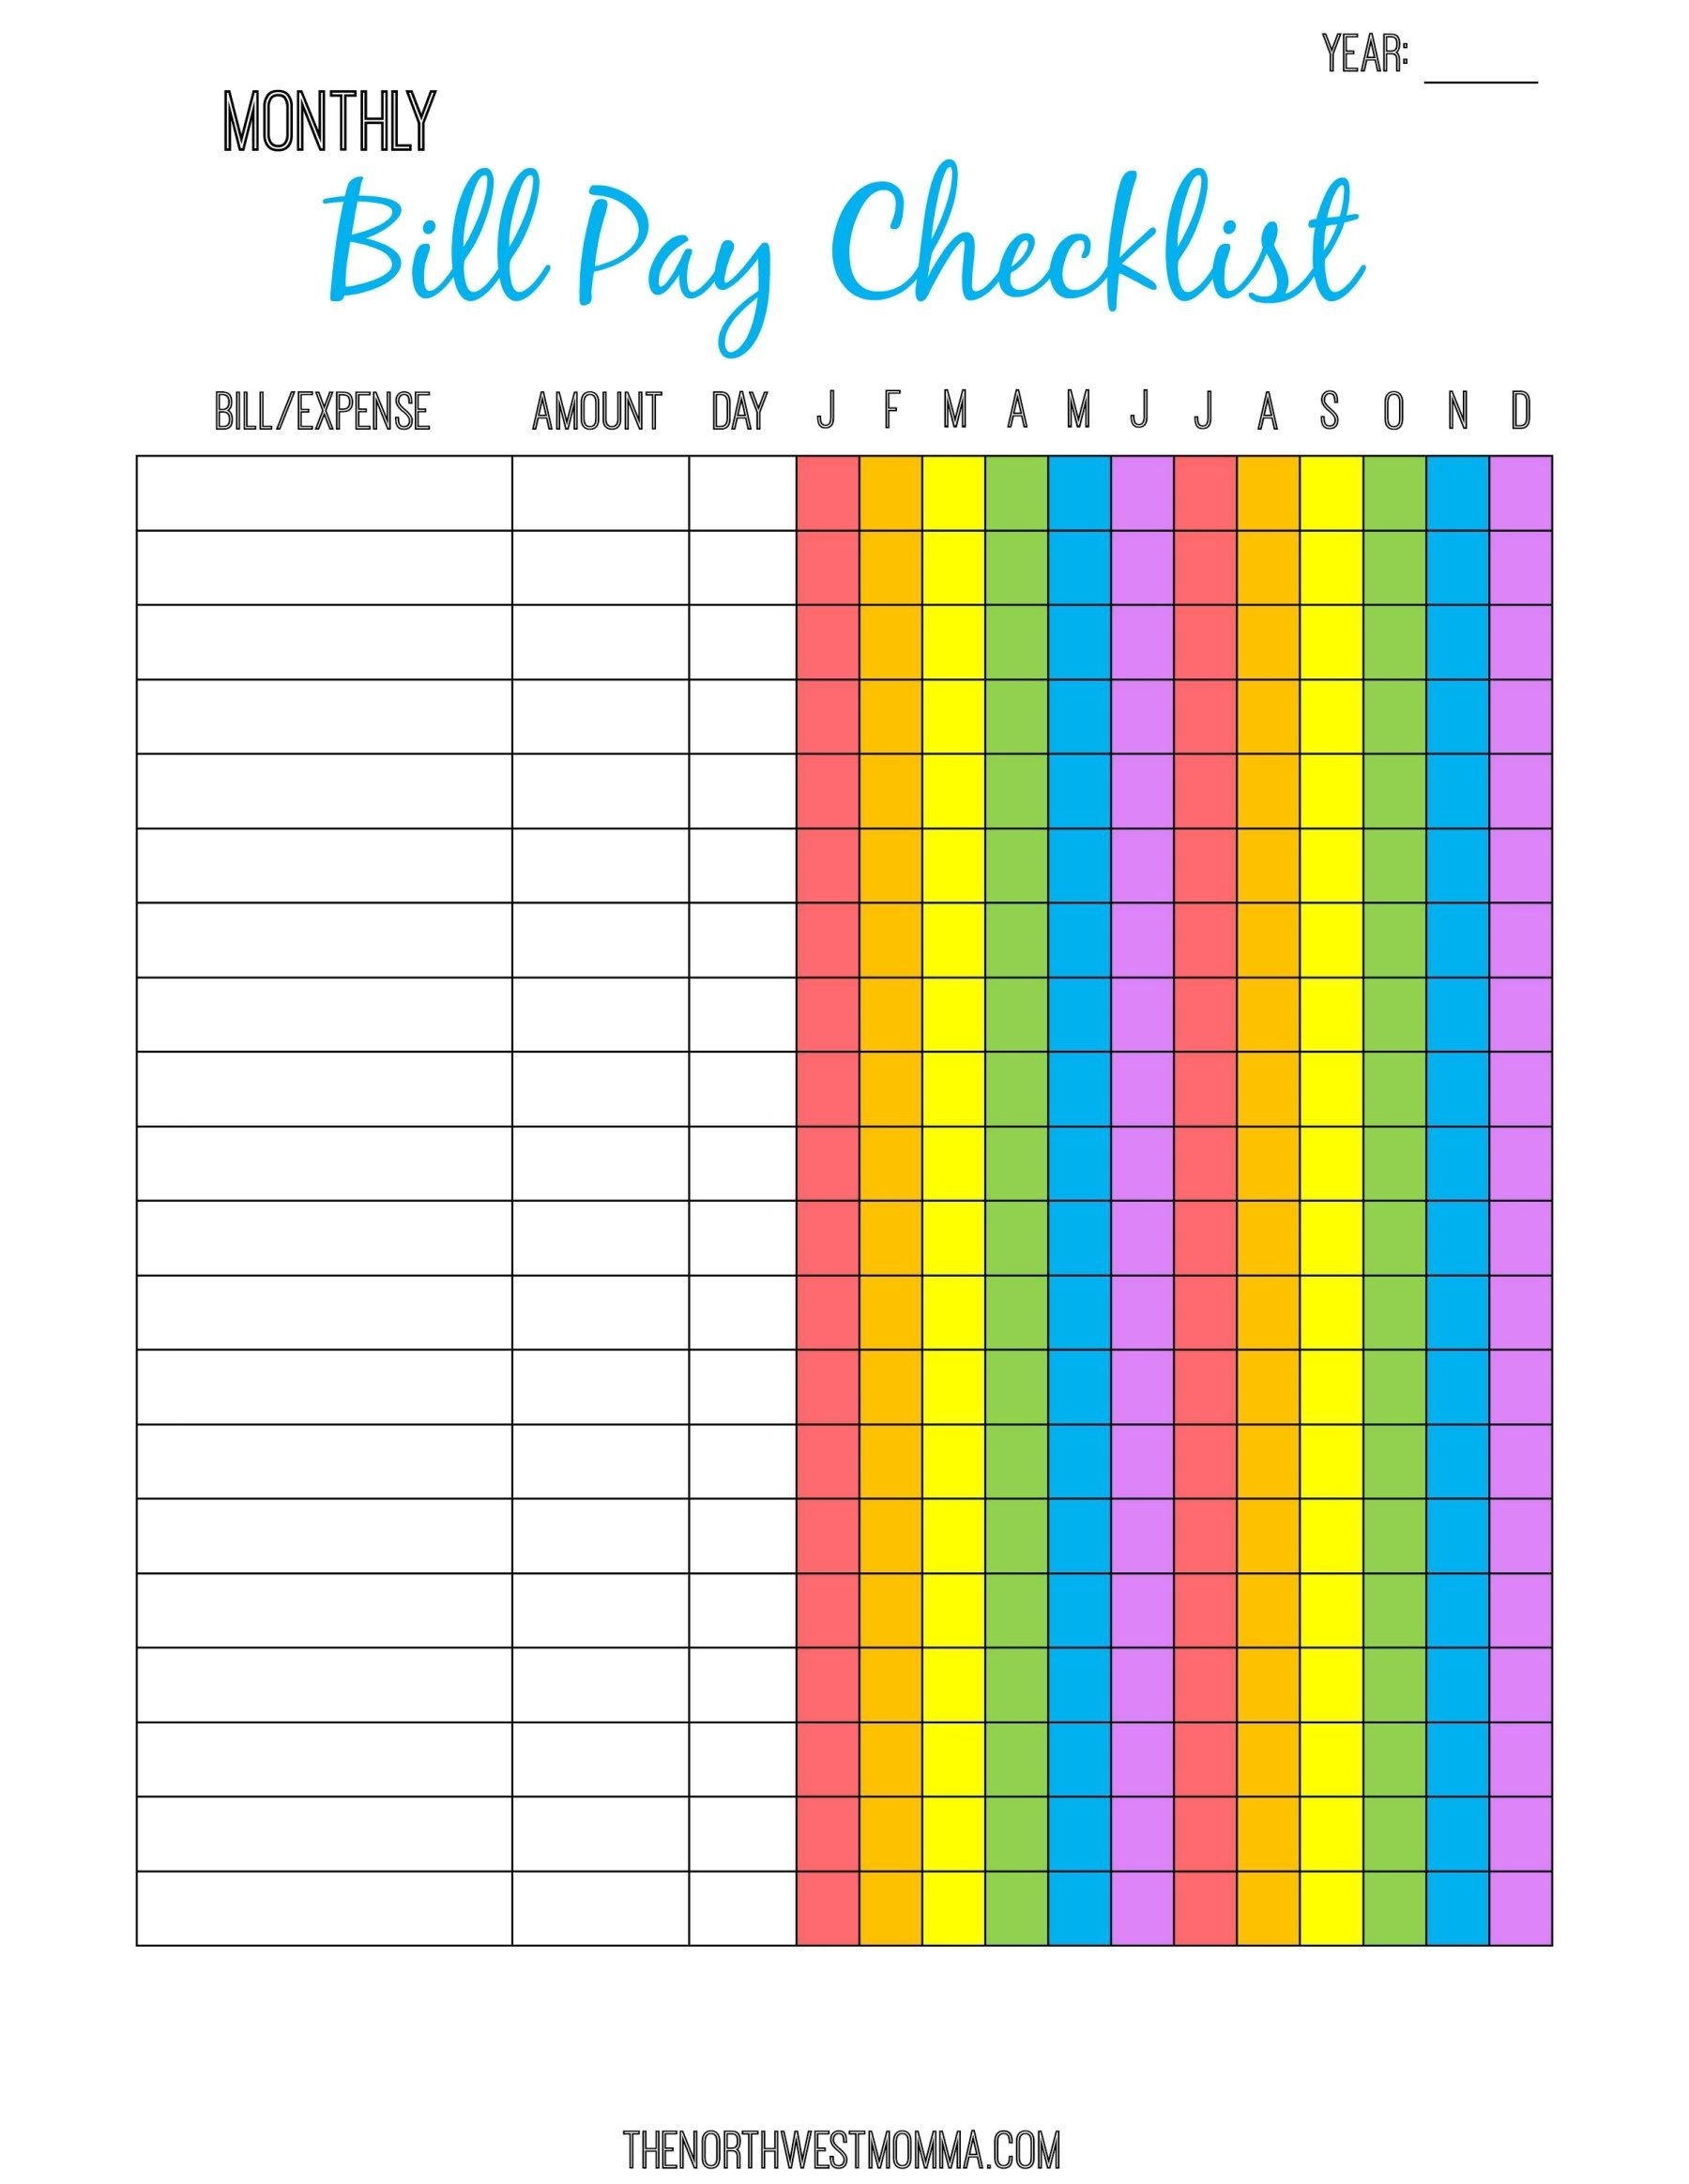 Monthly Bill Pay Checklist- Free Printable | Pinterest | Free  Free Monthly Bill Payment Checklist Editable